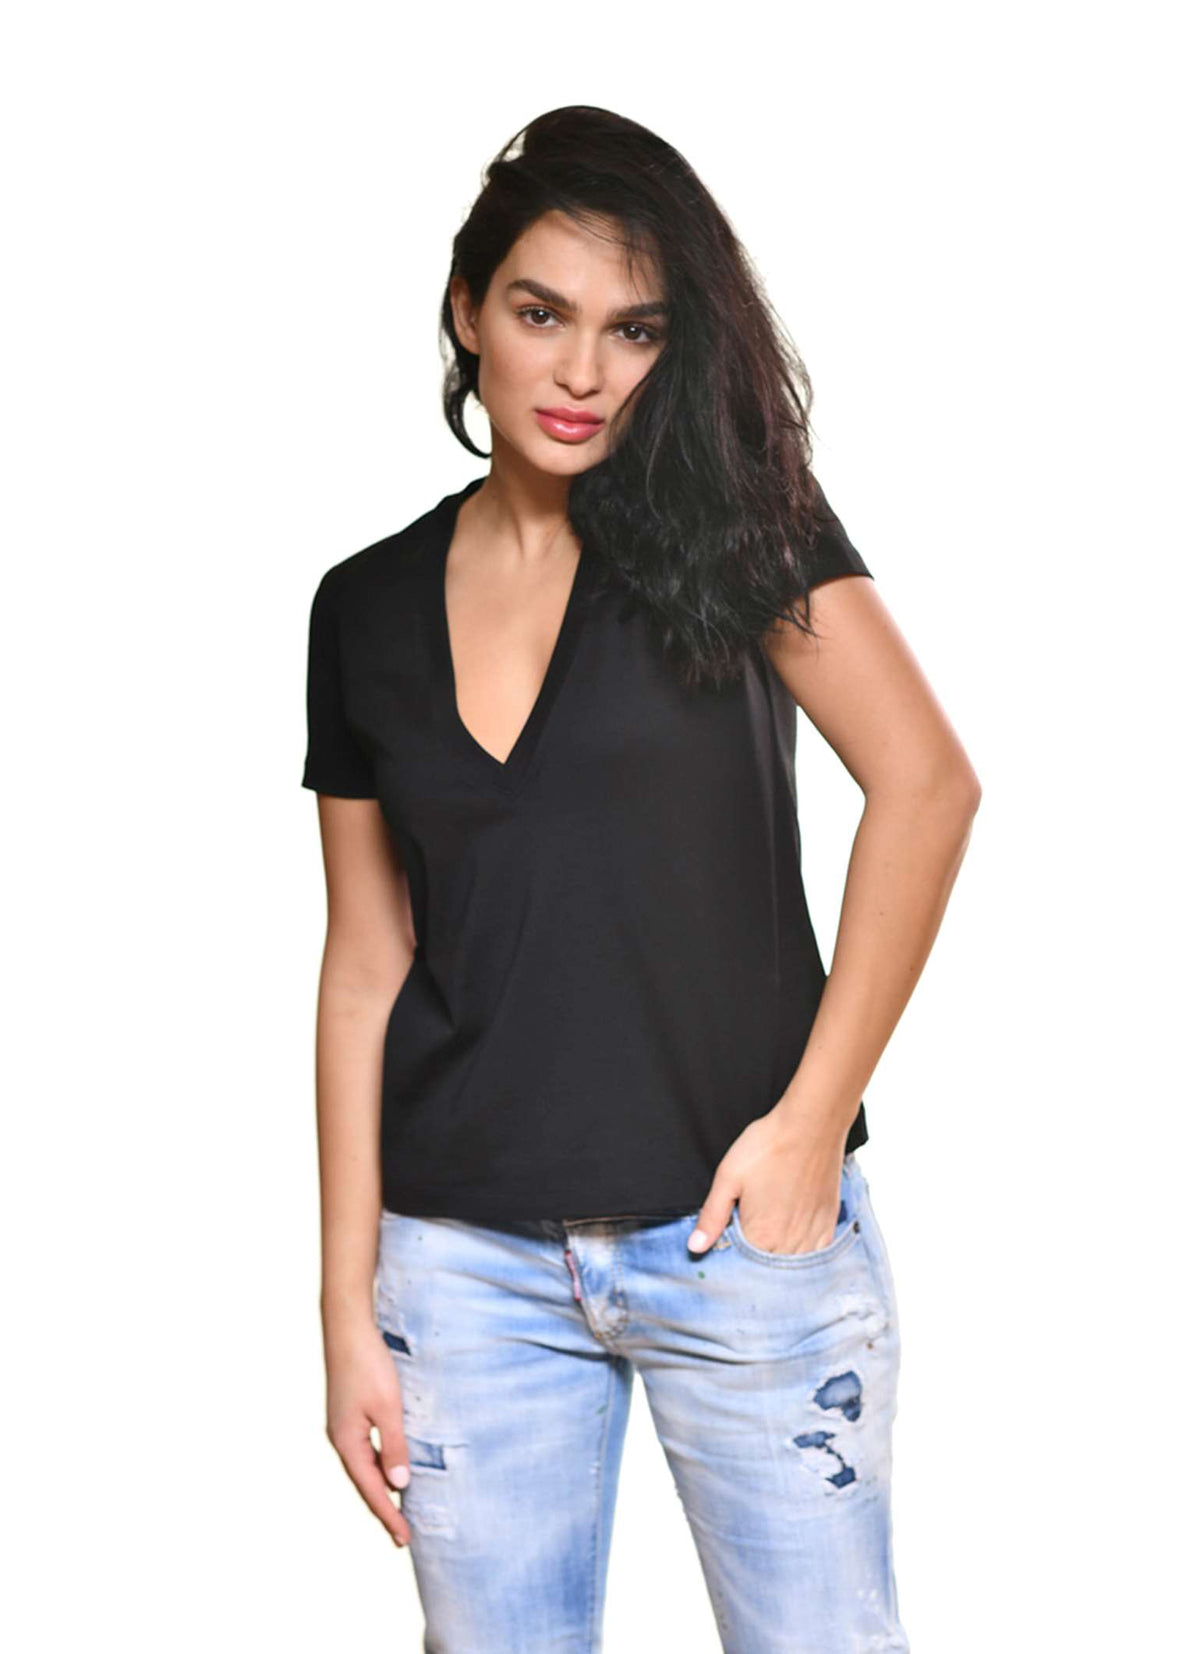 Women wearing Carmen Sol tees for women in color black with jeans